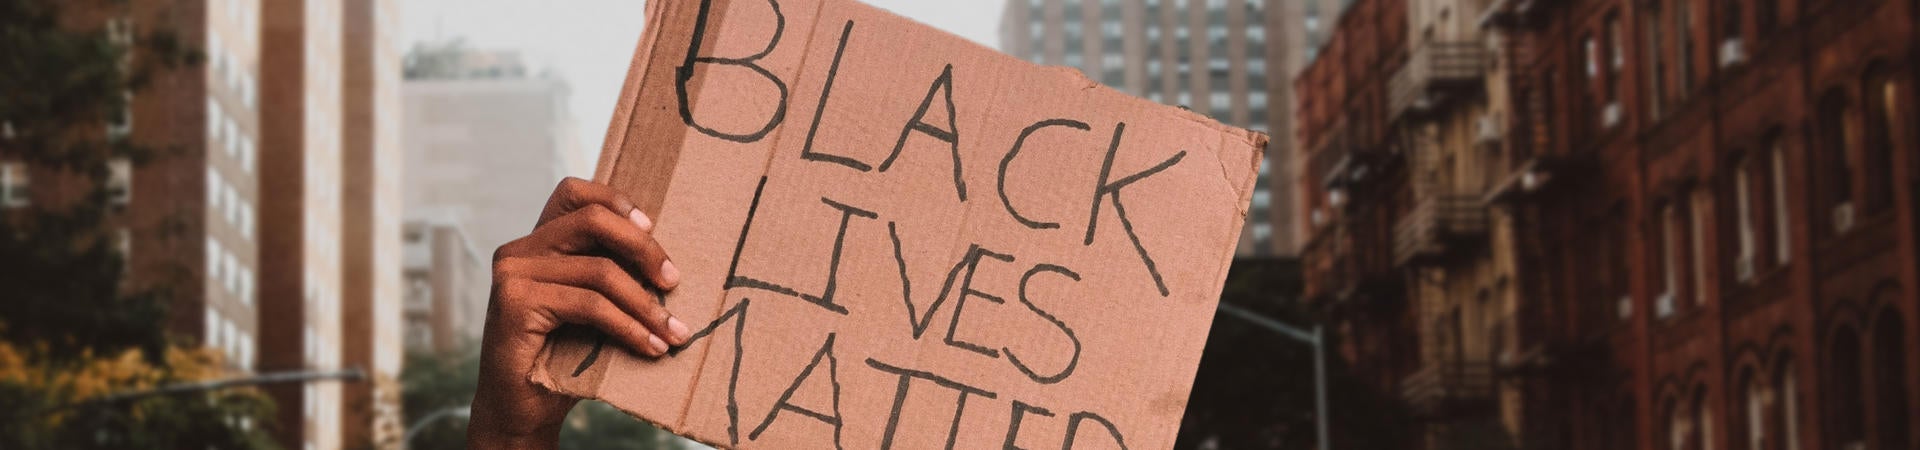 The Importance of the Black Press on the BLM Movement